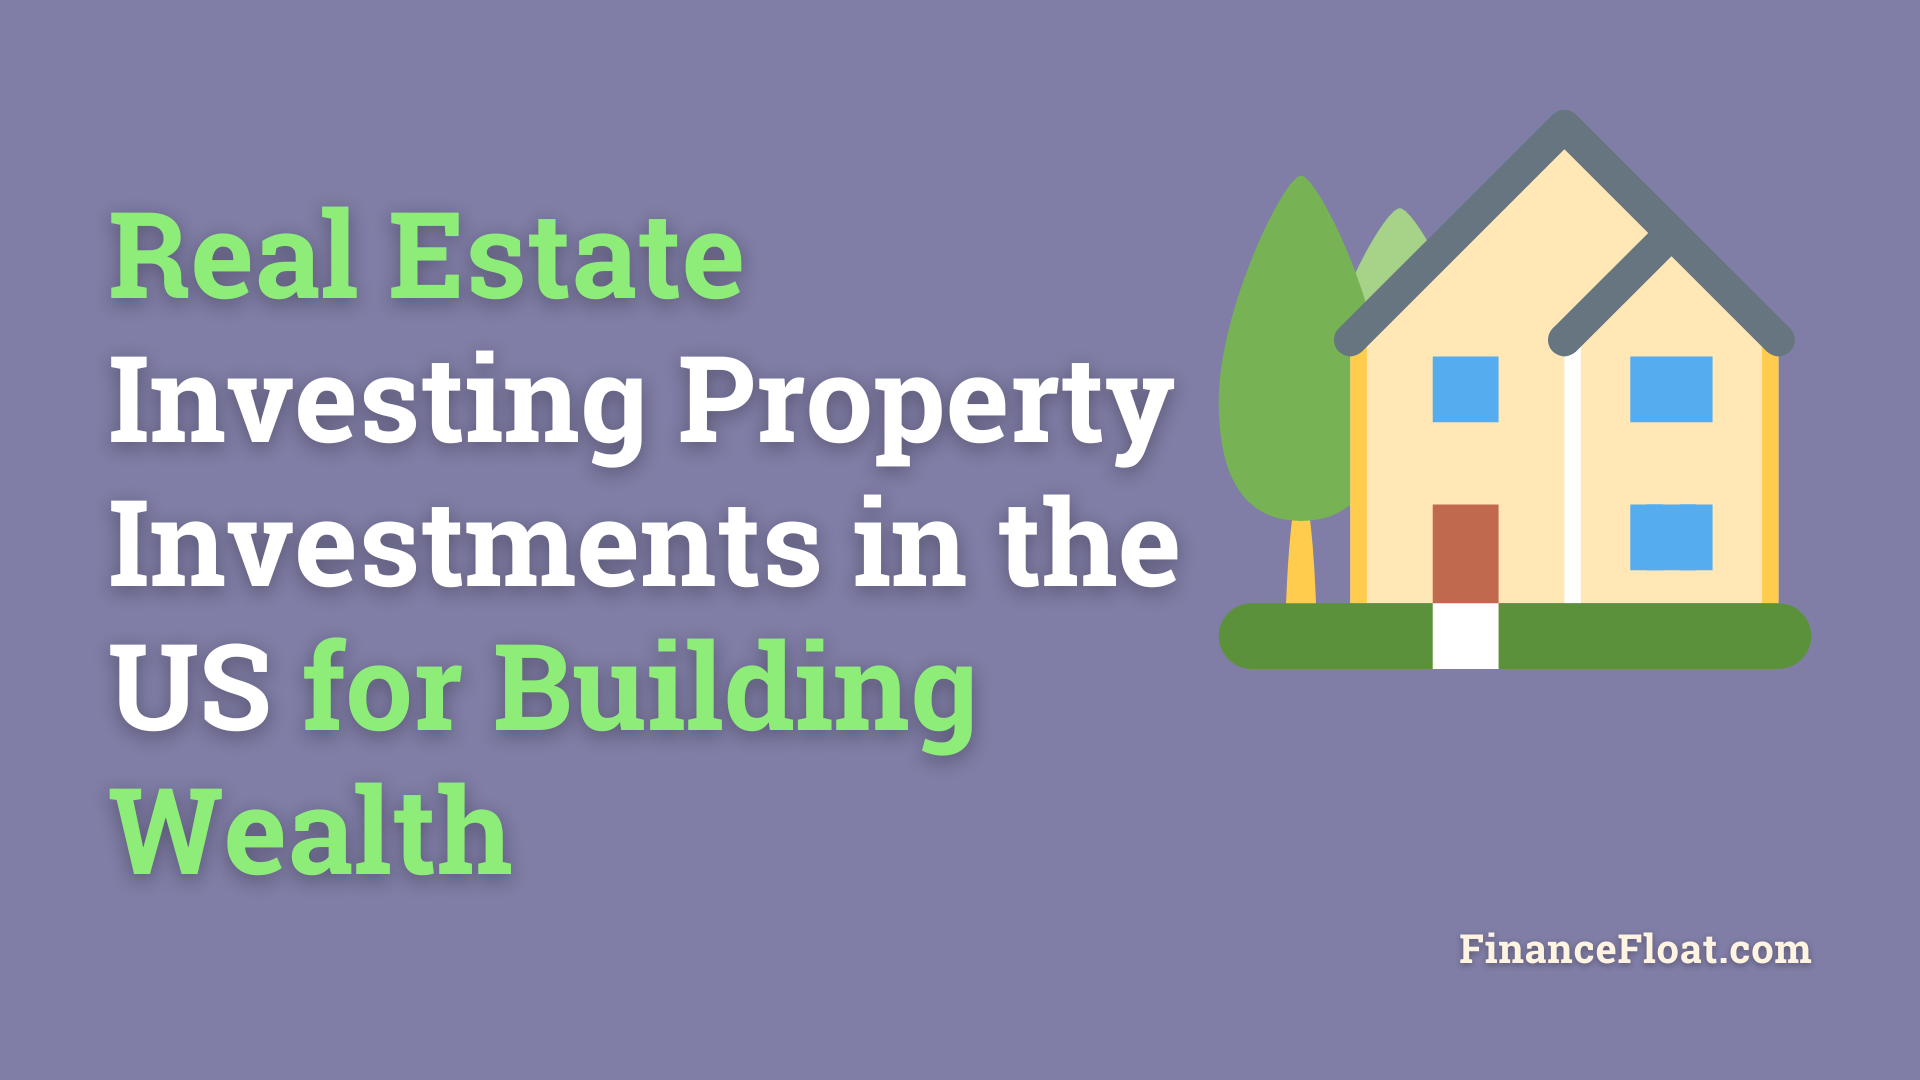 Real Estate Investing Property Investments in the US for Building Wealth